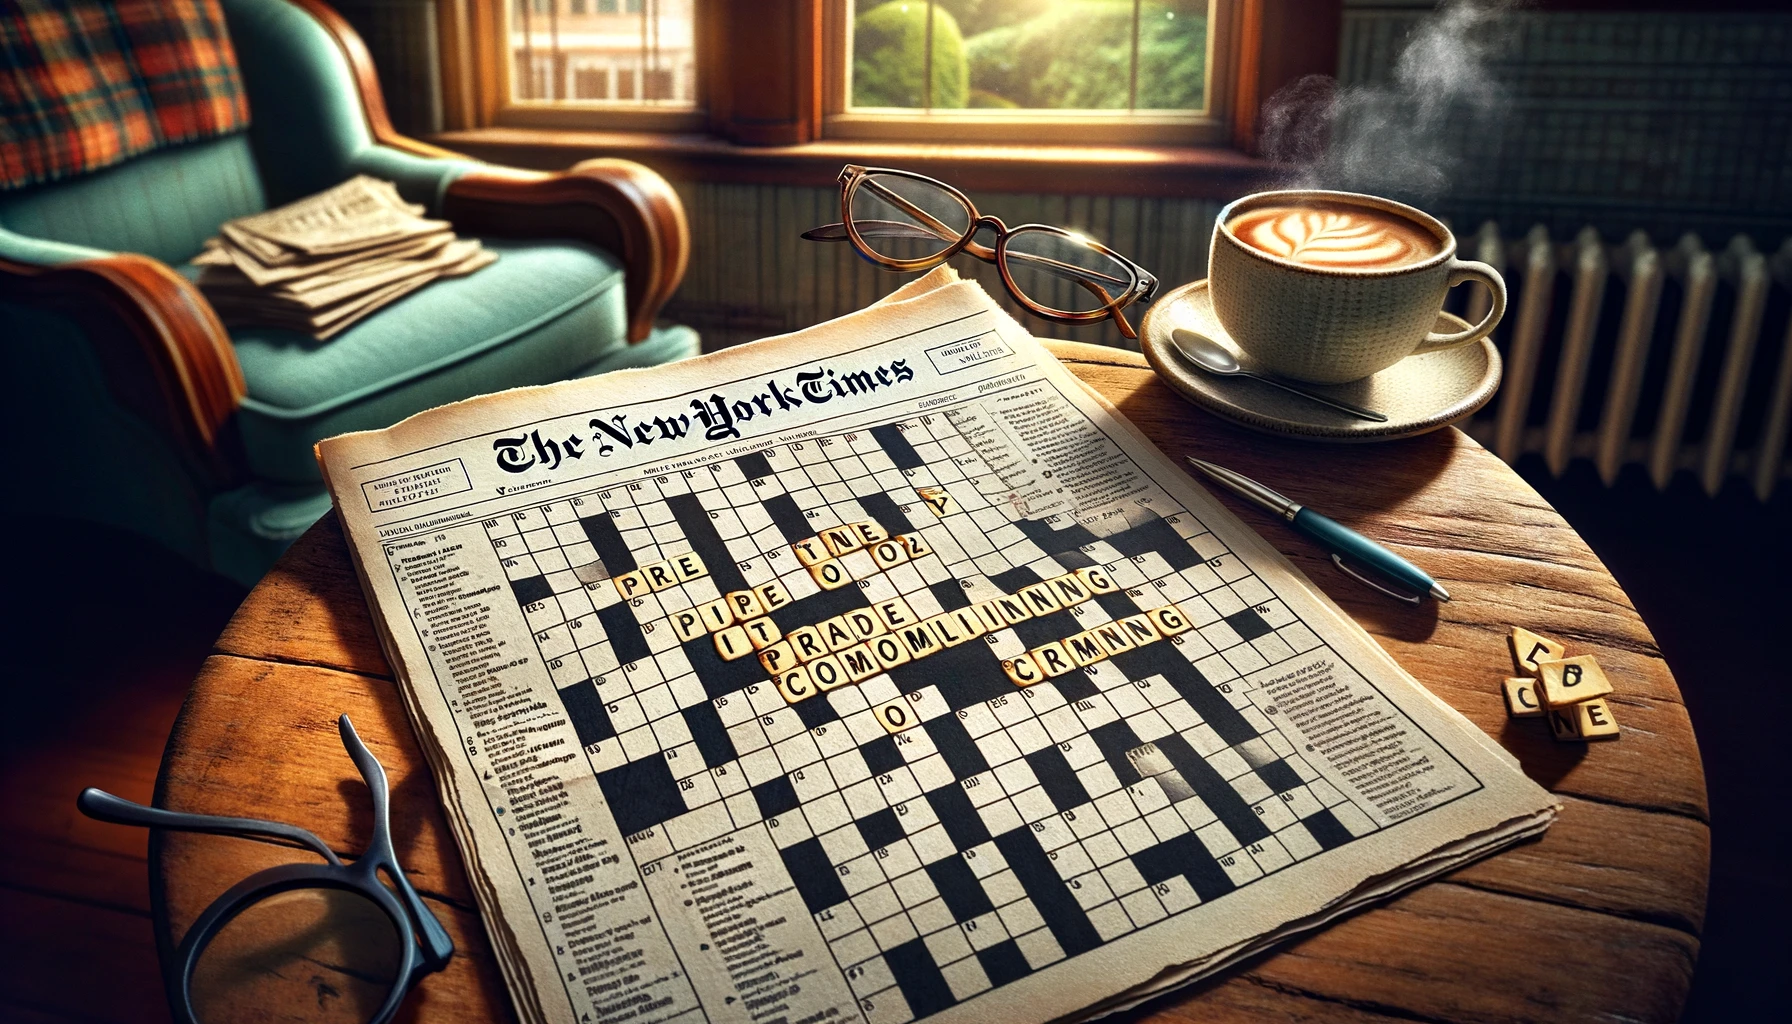 How The New York Times Revolutionized Information Sharing